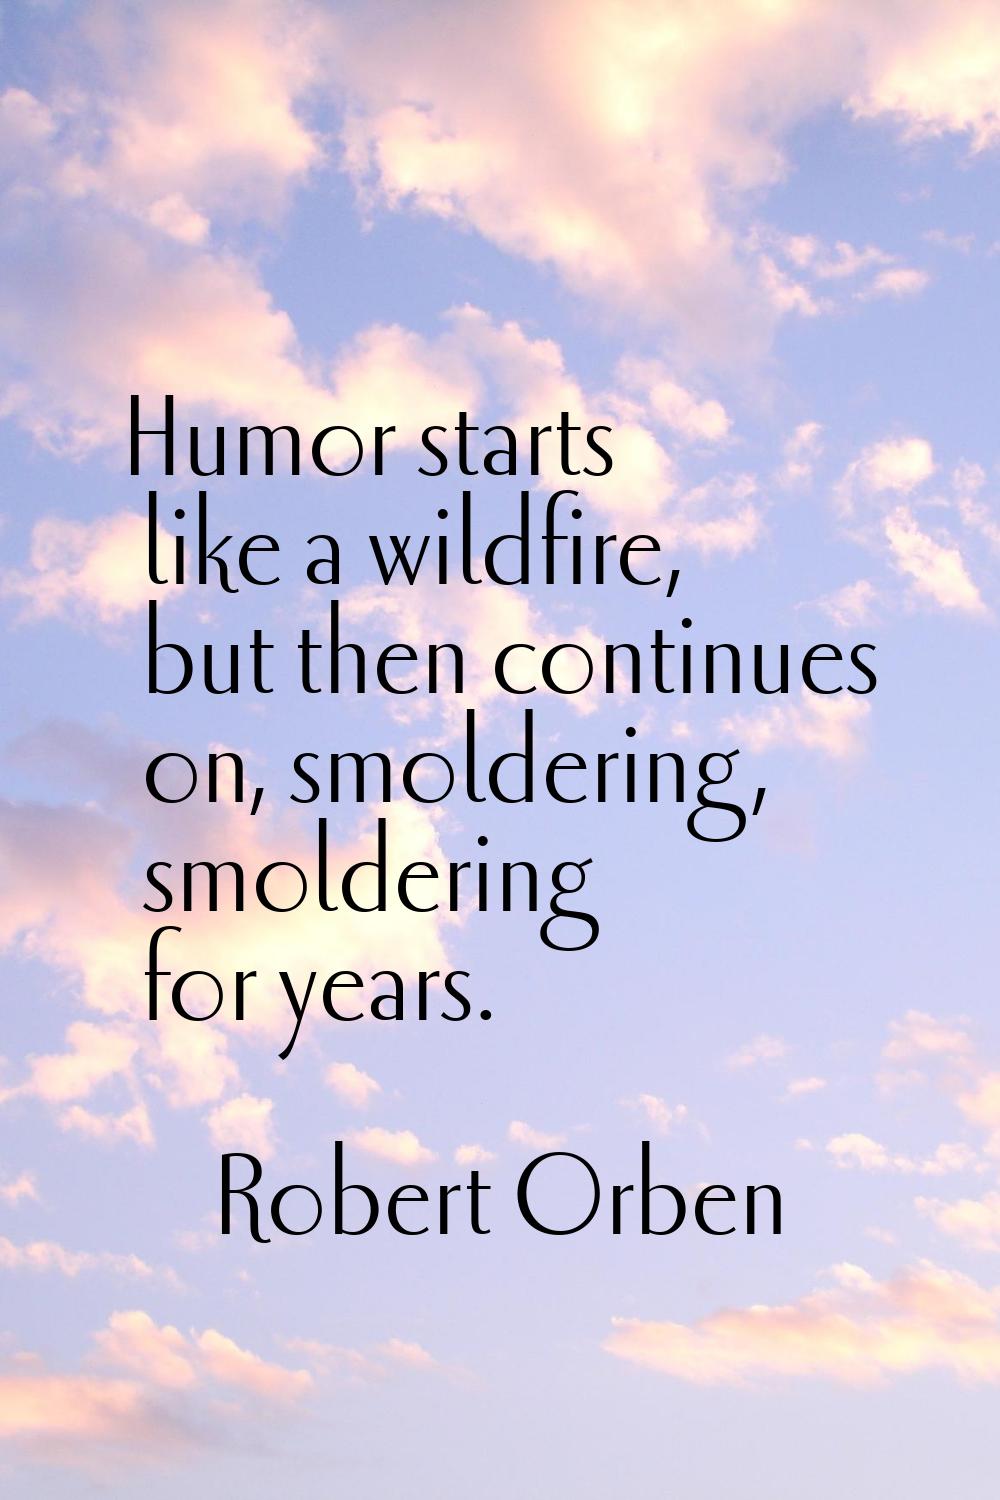 Humor starts like a wildfire, but then continues on, smoldering, smoldering for years.